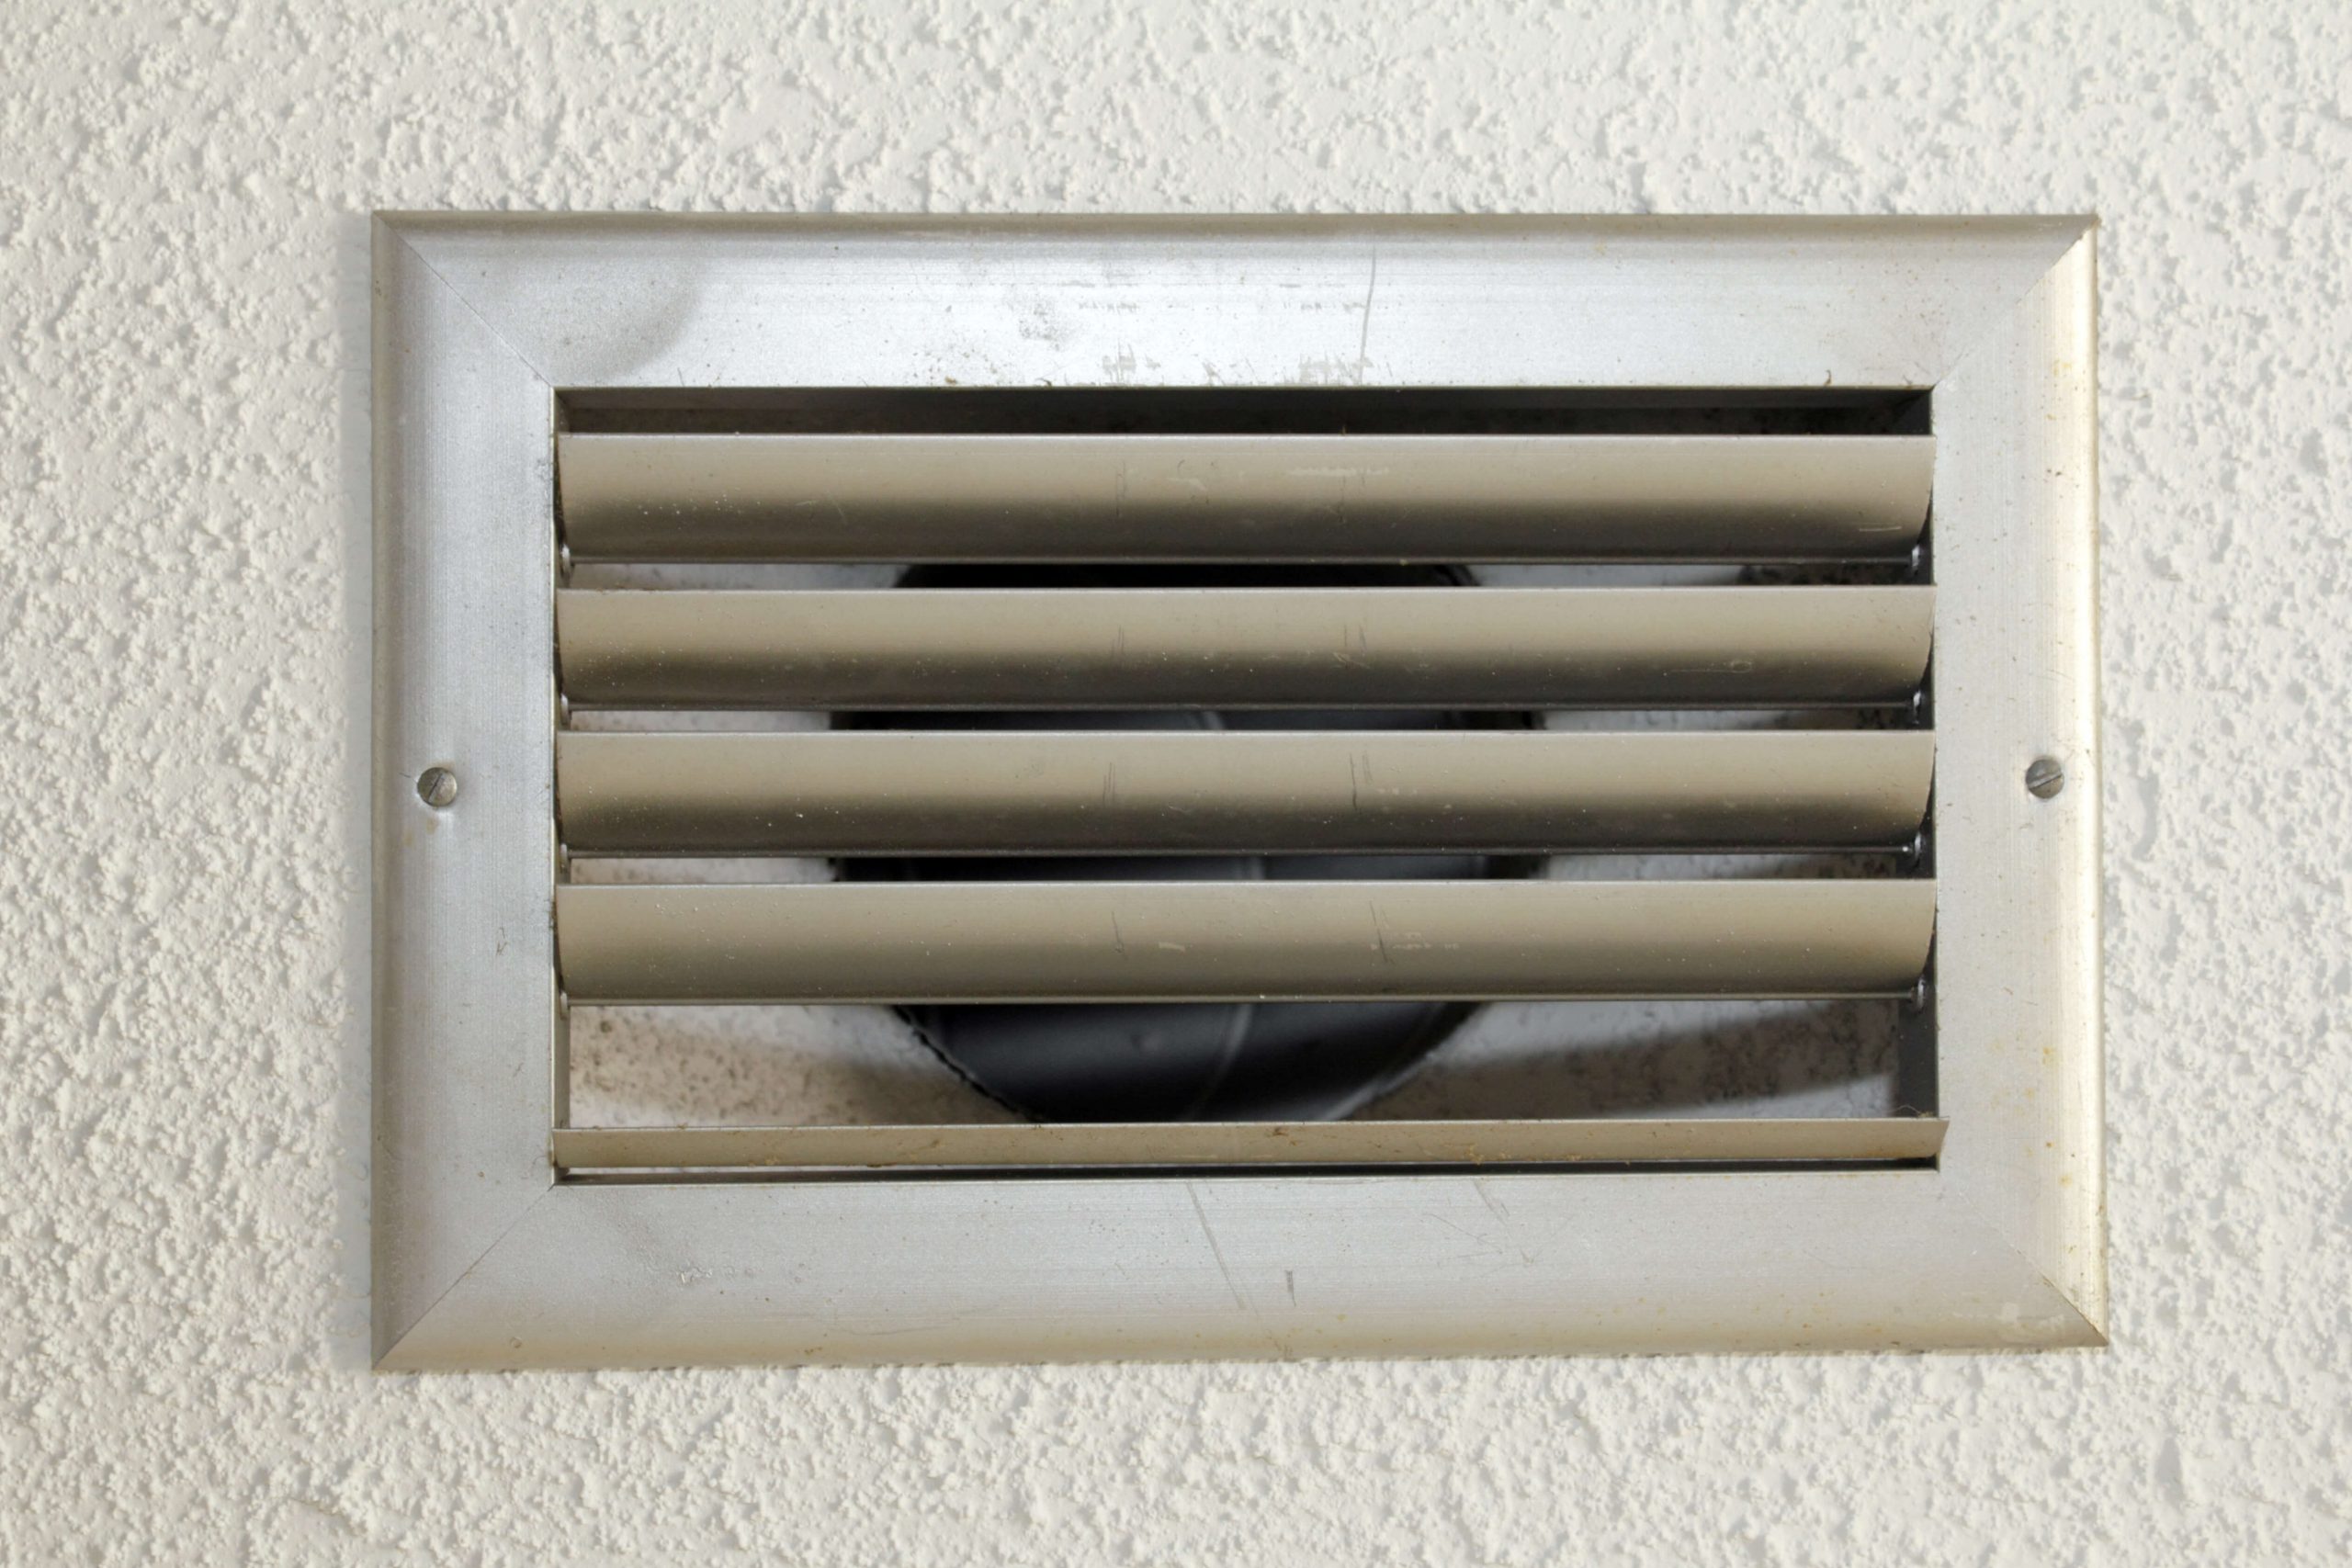 bigstock Ceiling Air Vent 61644602 scaled 1